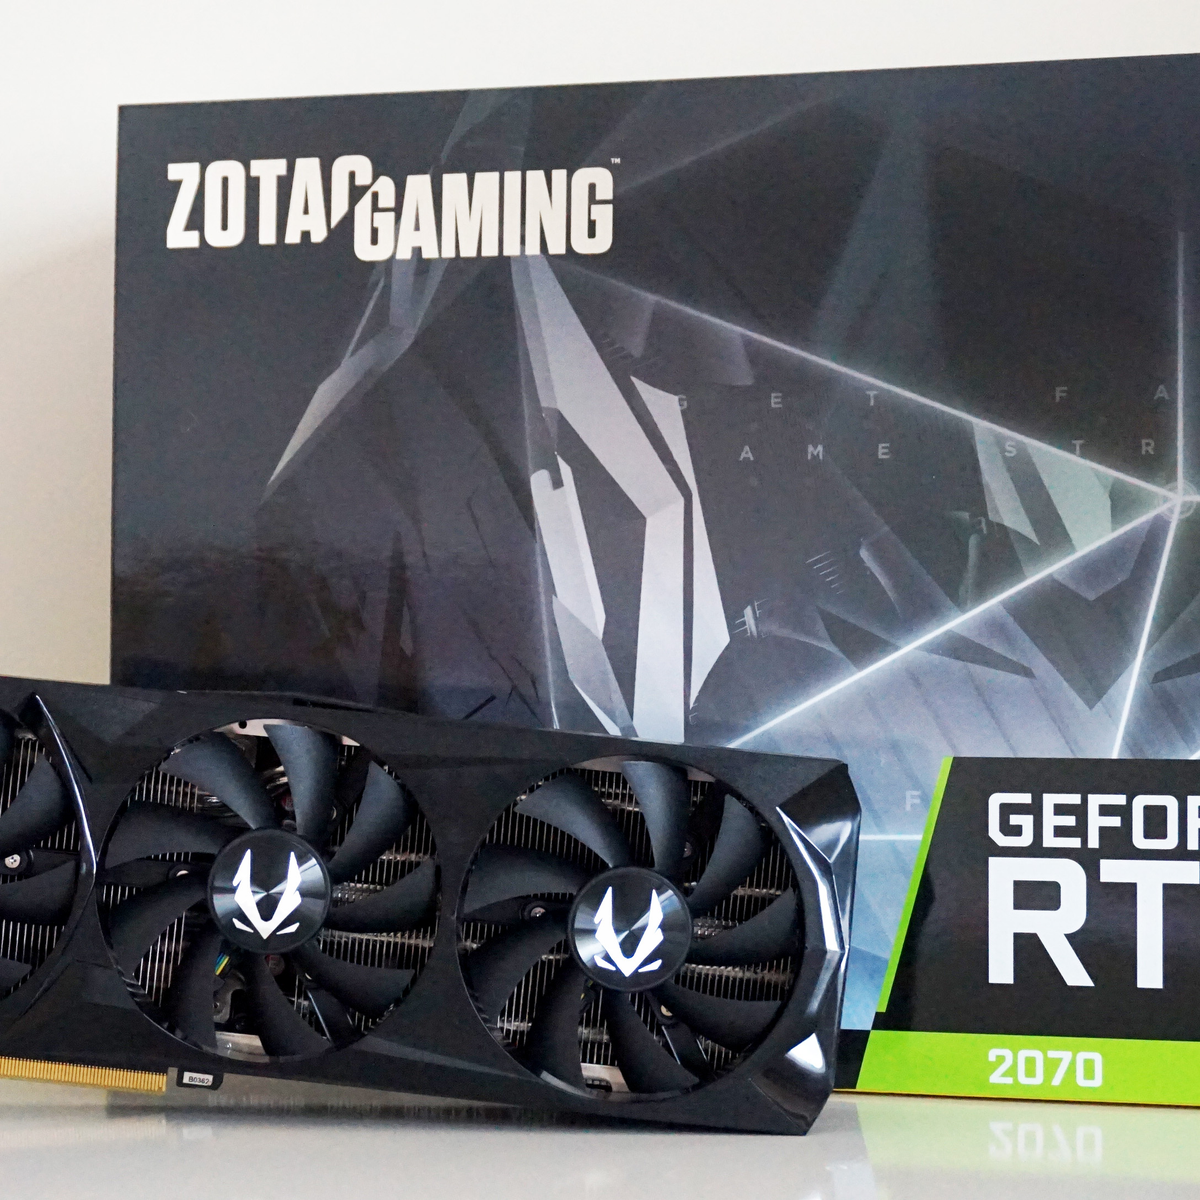 Nvidia GeForce RTX 2070 review: Better than the GTX 1080